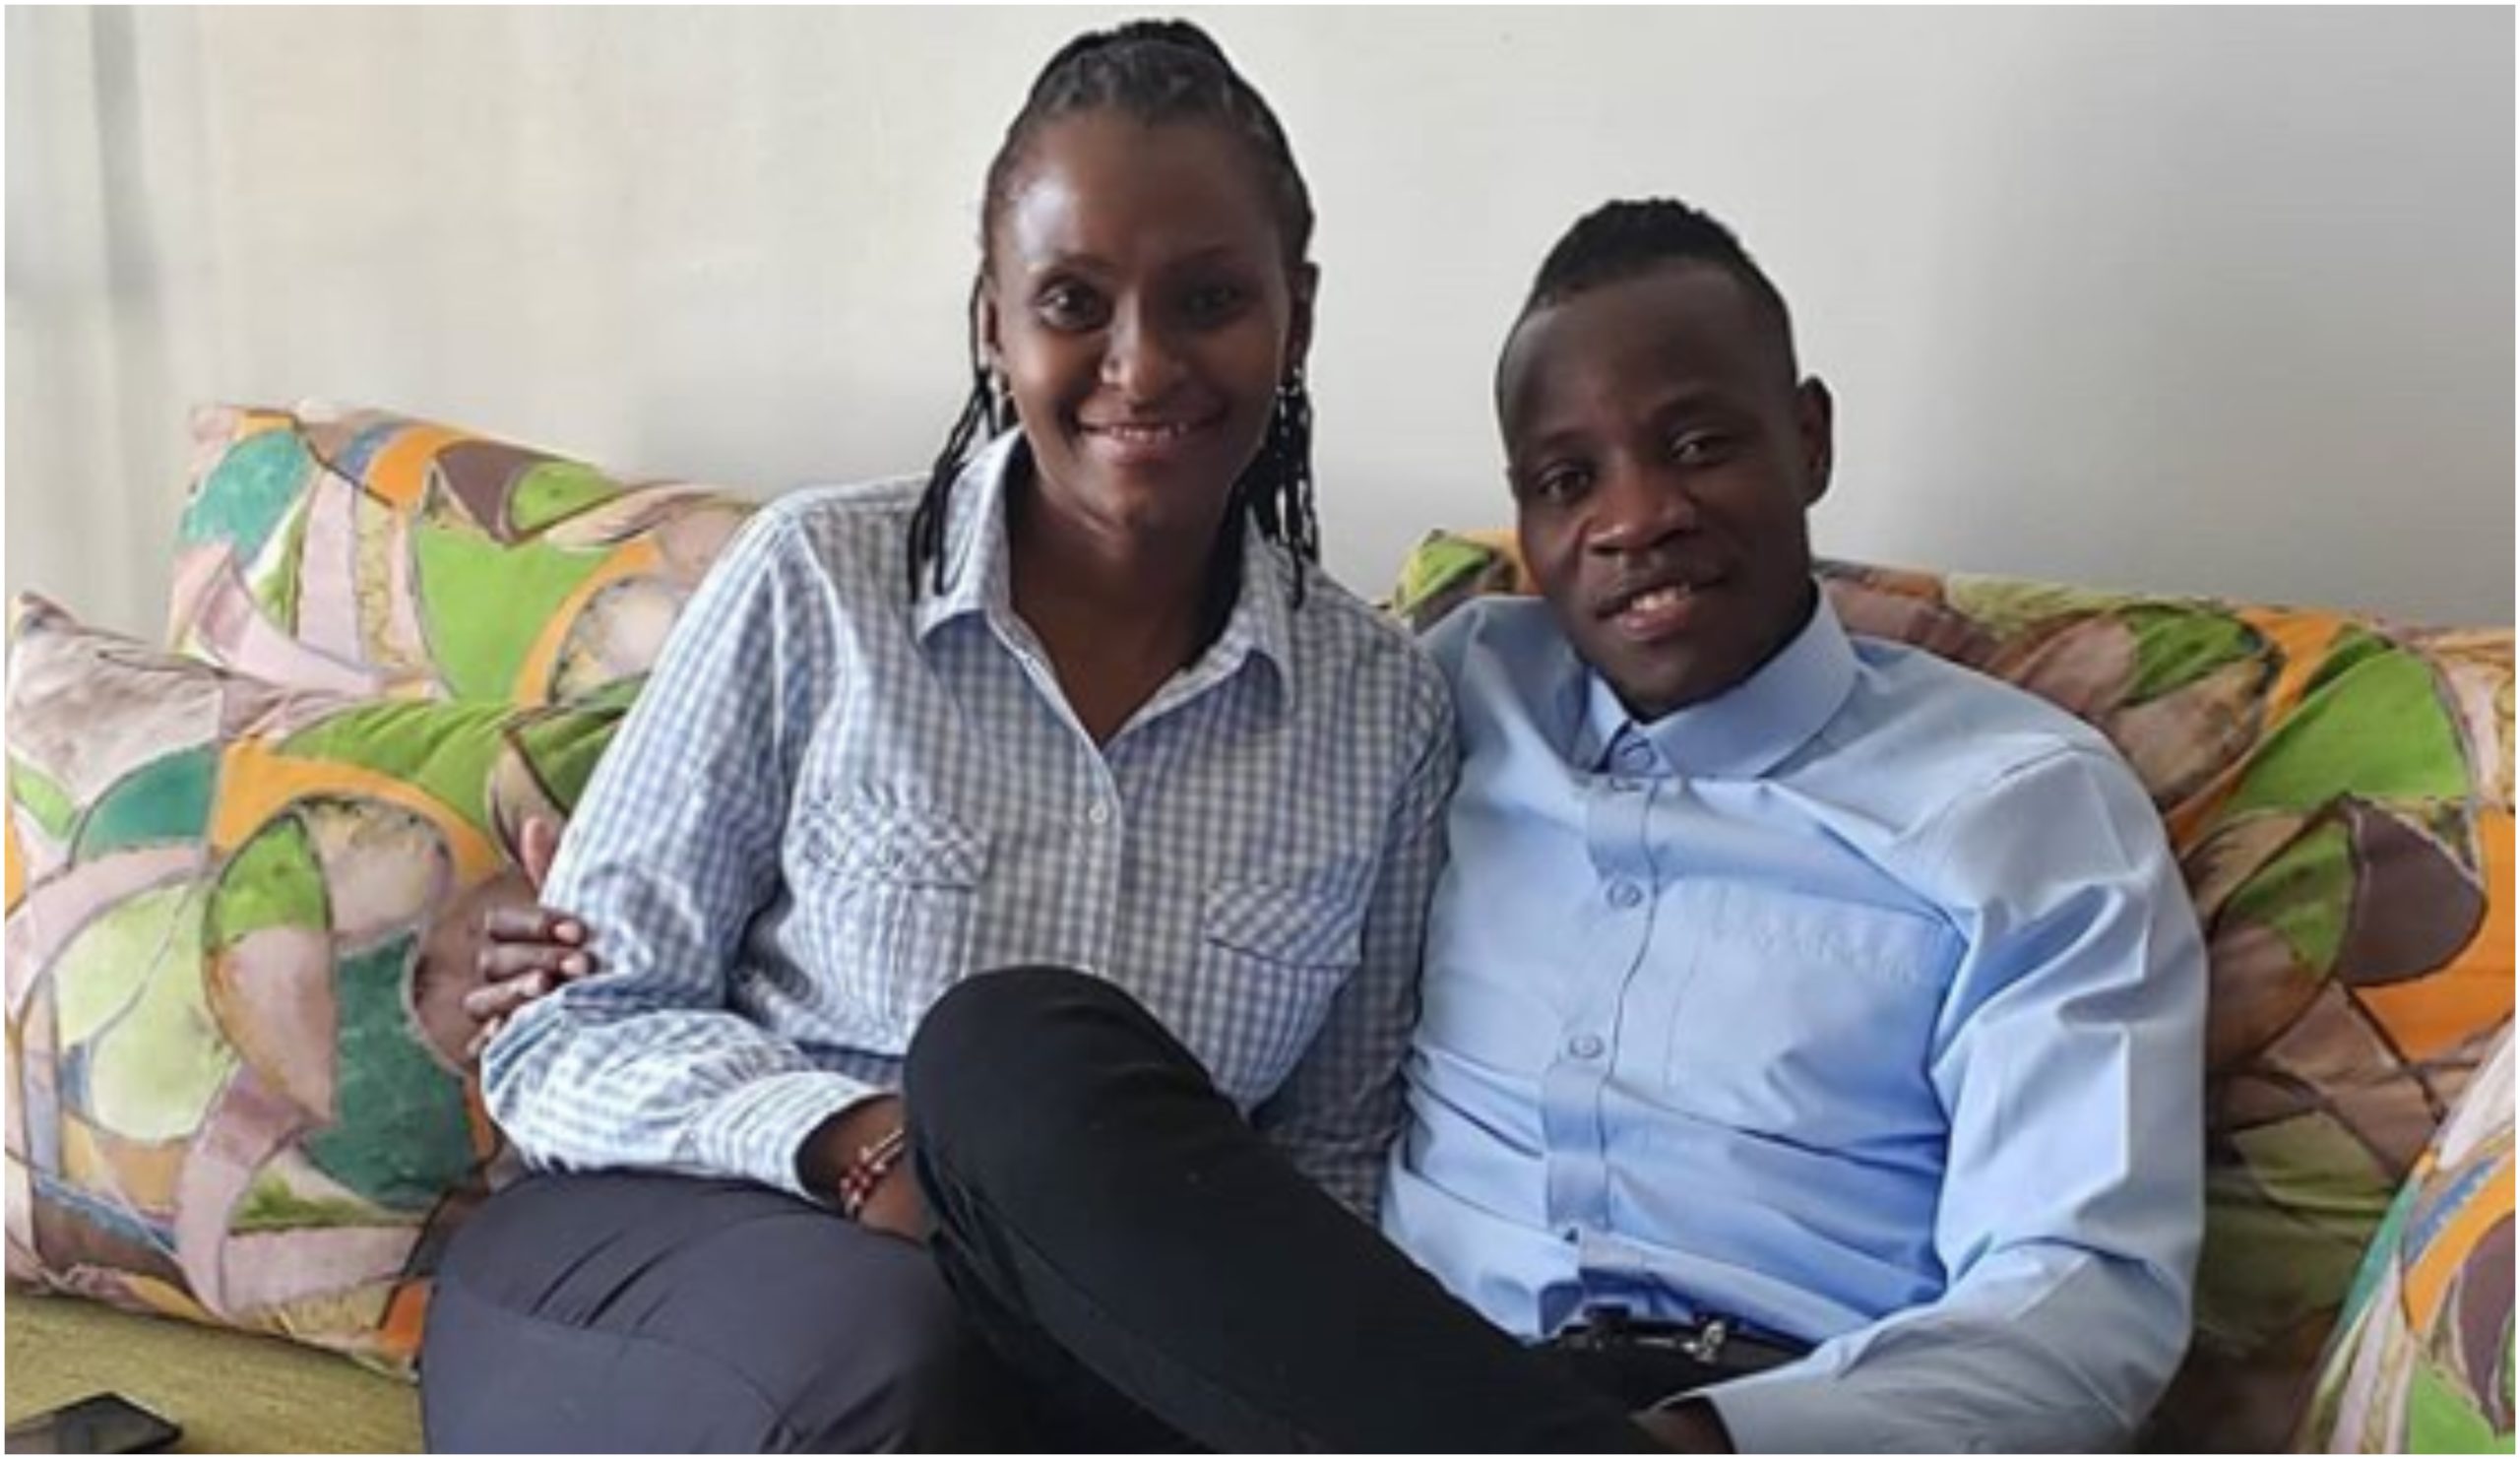 Photos of Esther Musila’s grown kids surface online weeks after getting engaged to Guardian Angel